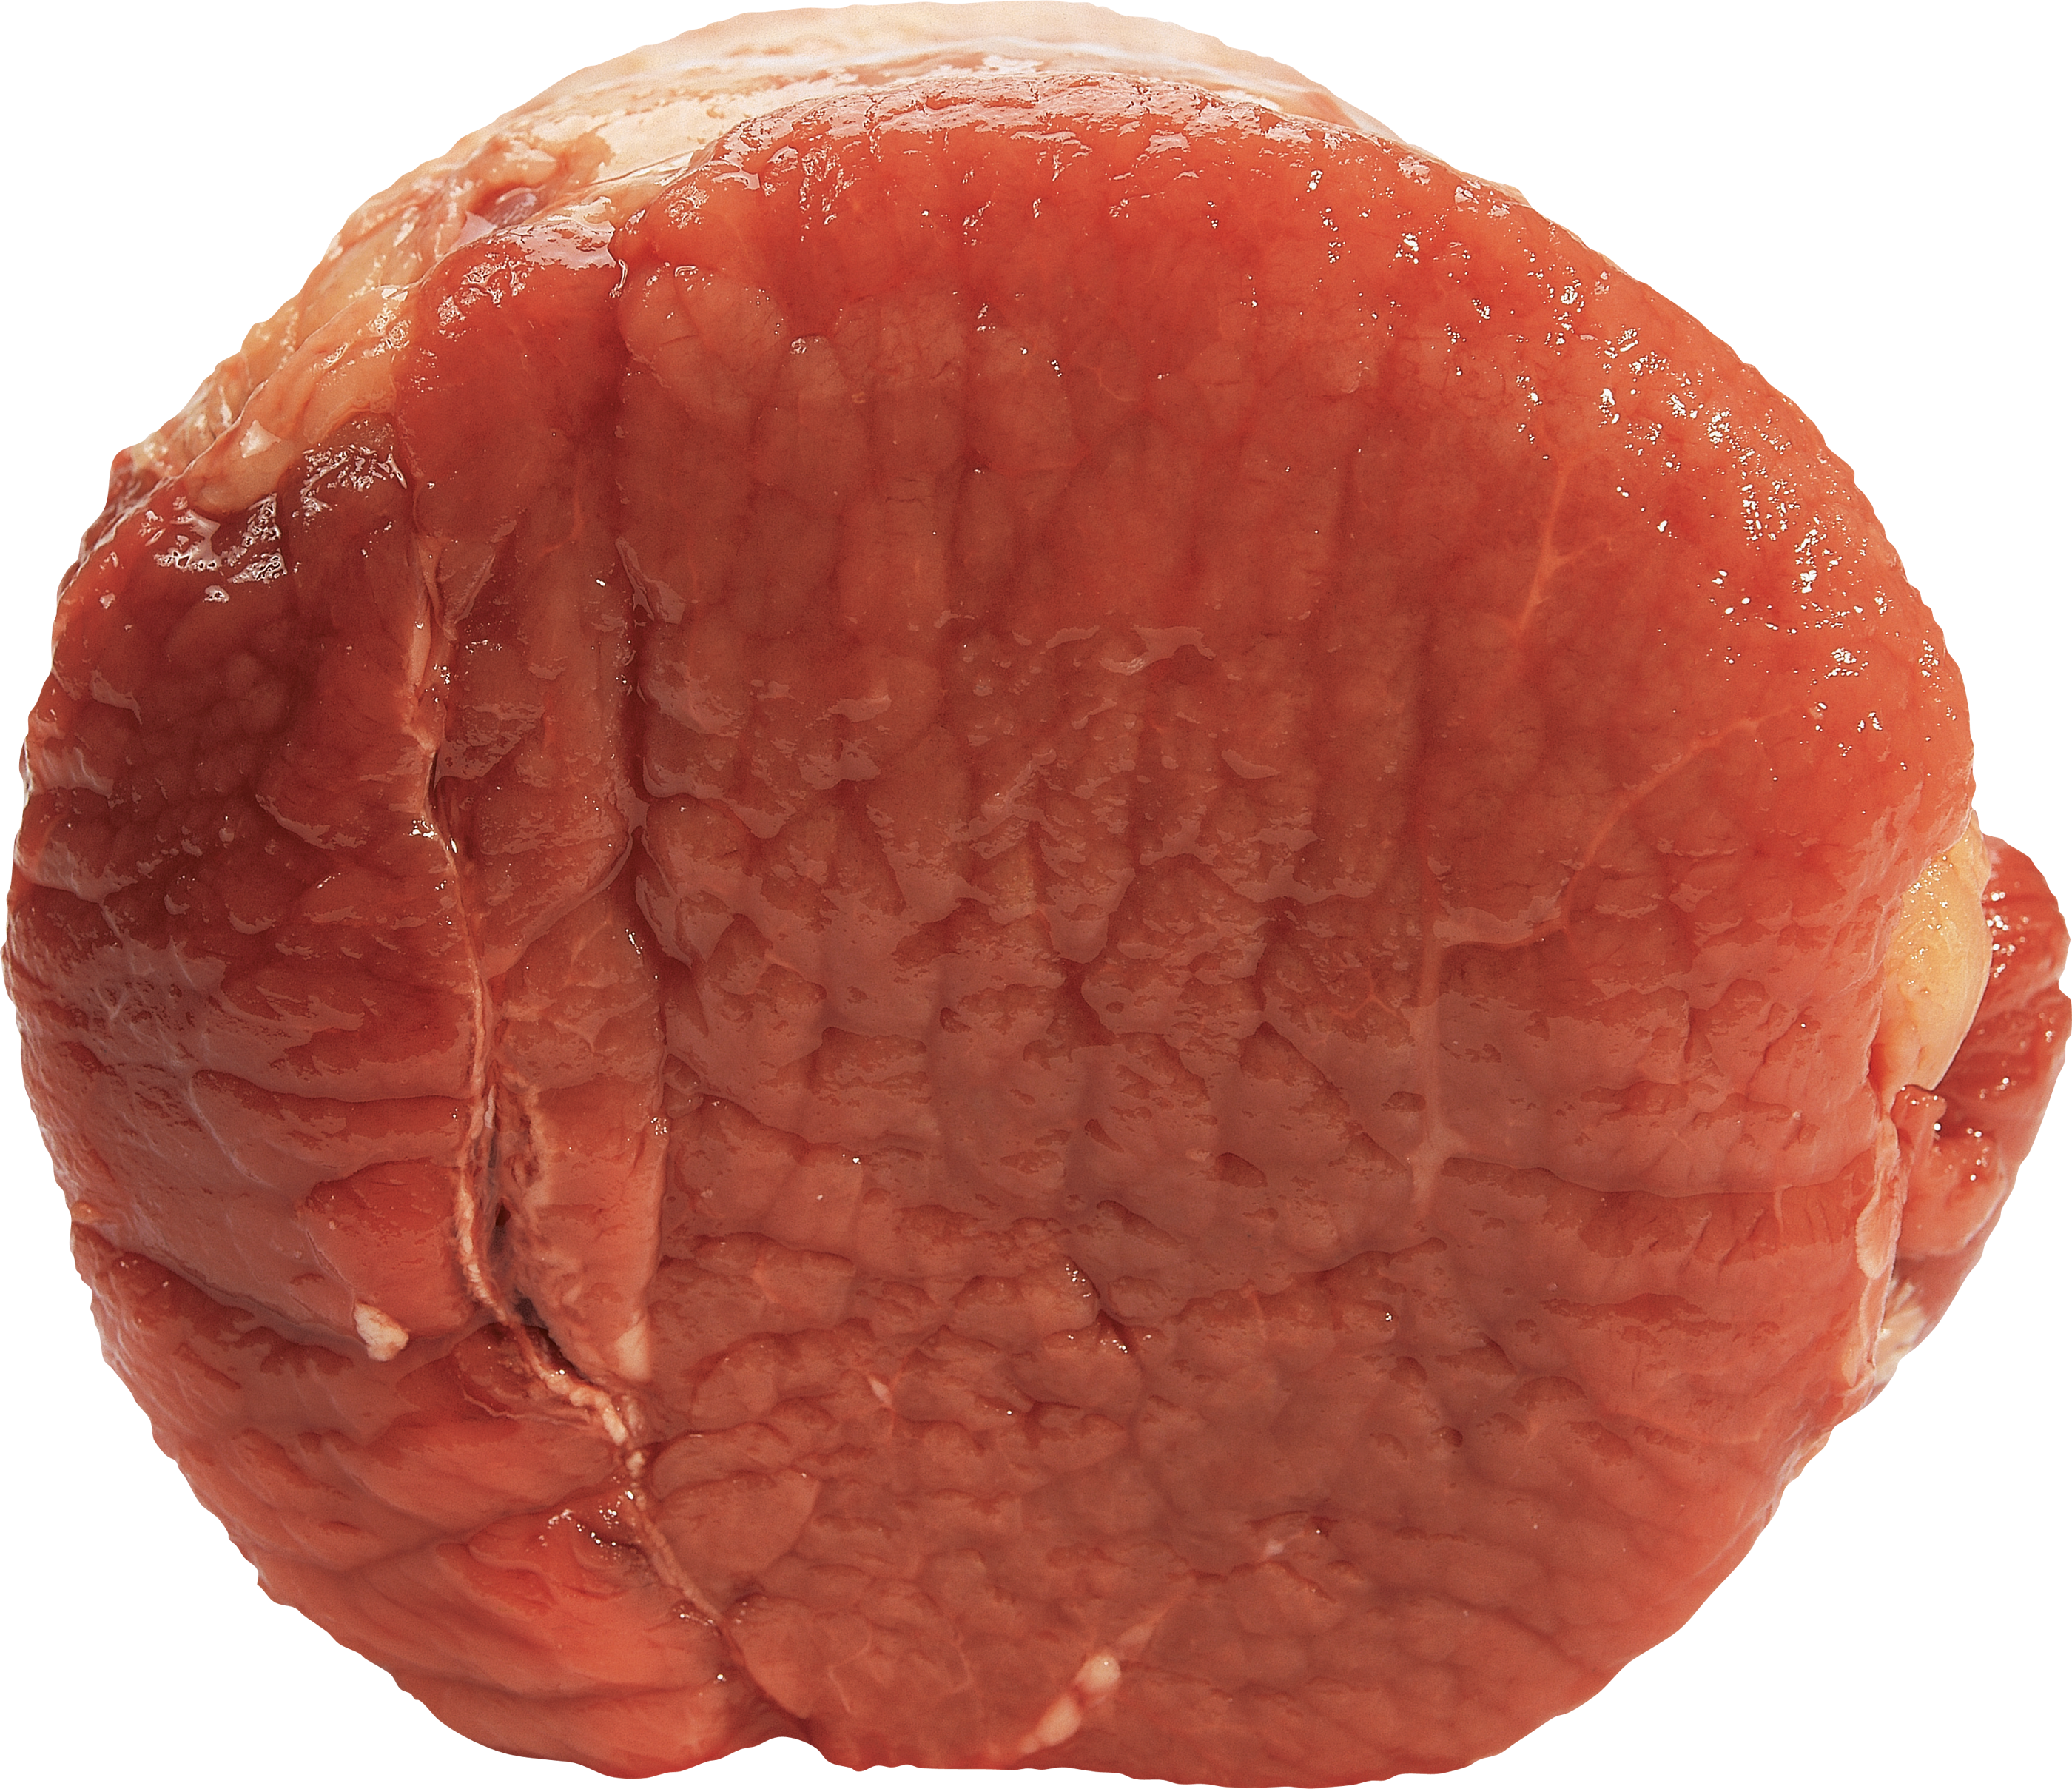 Png image free download. Meat clipart healthy meat